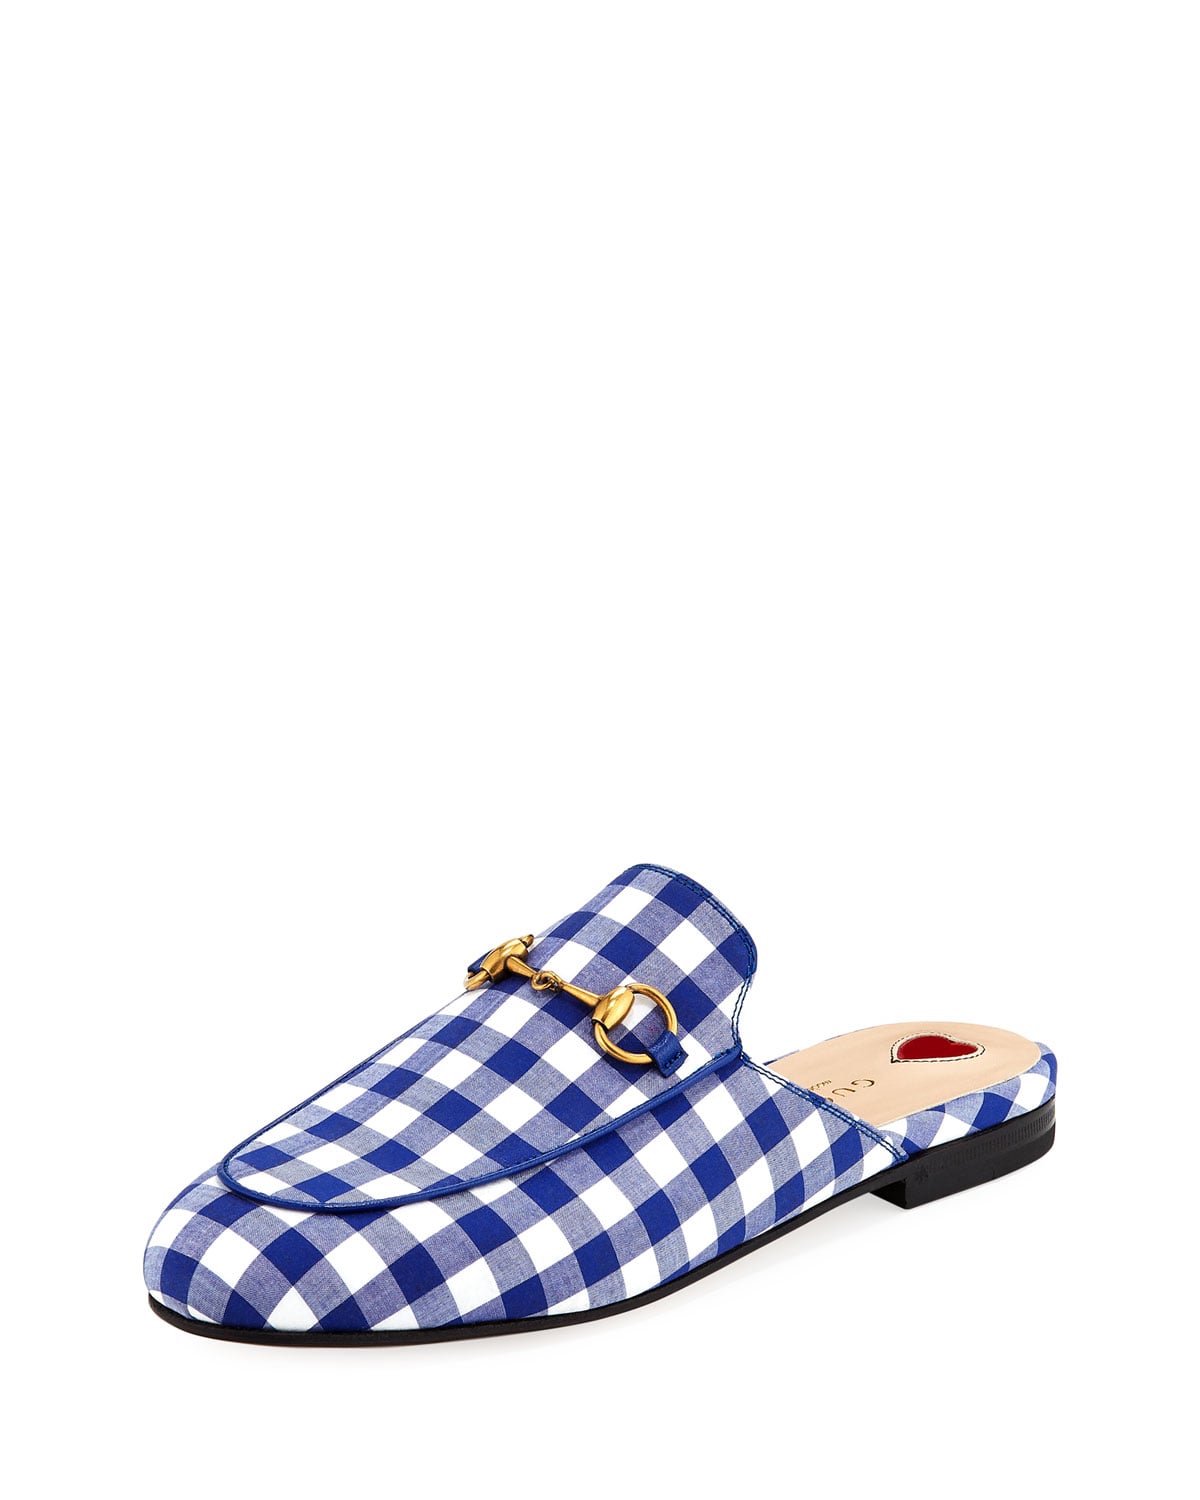 Gucci Gingham Slides | Say Hello to 